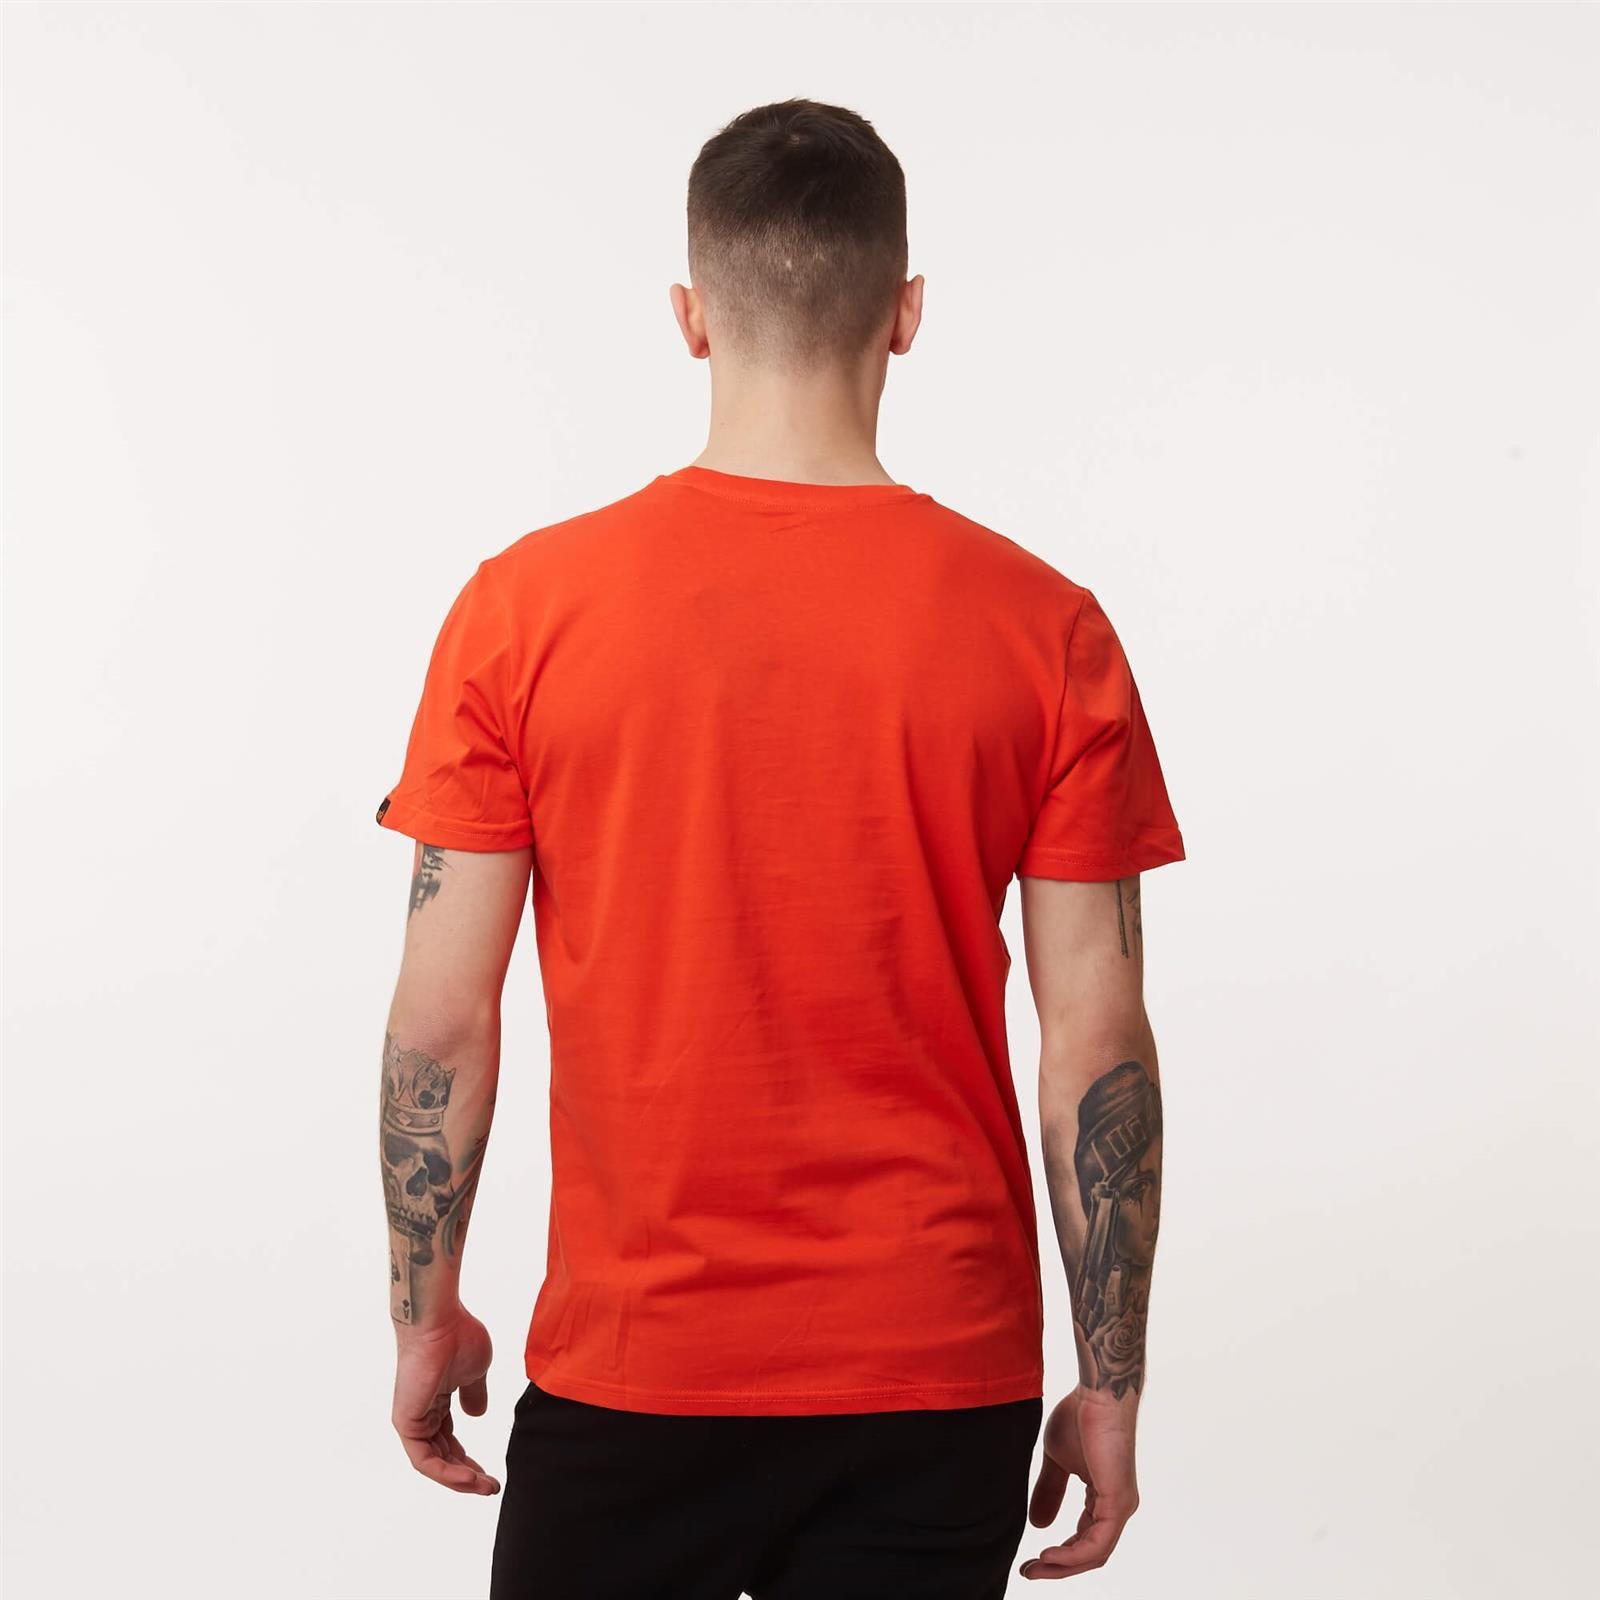 Alpha Industries \\ Alpha | brands BASIC T-SHIRT clothing Brands \\ Men #Recommended \\ T-shirts ATOMIC Ellesse Men Industries #Brands clothing \\ RED \\ Men\'s \\